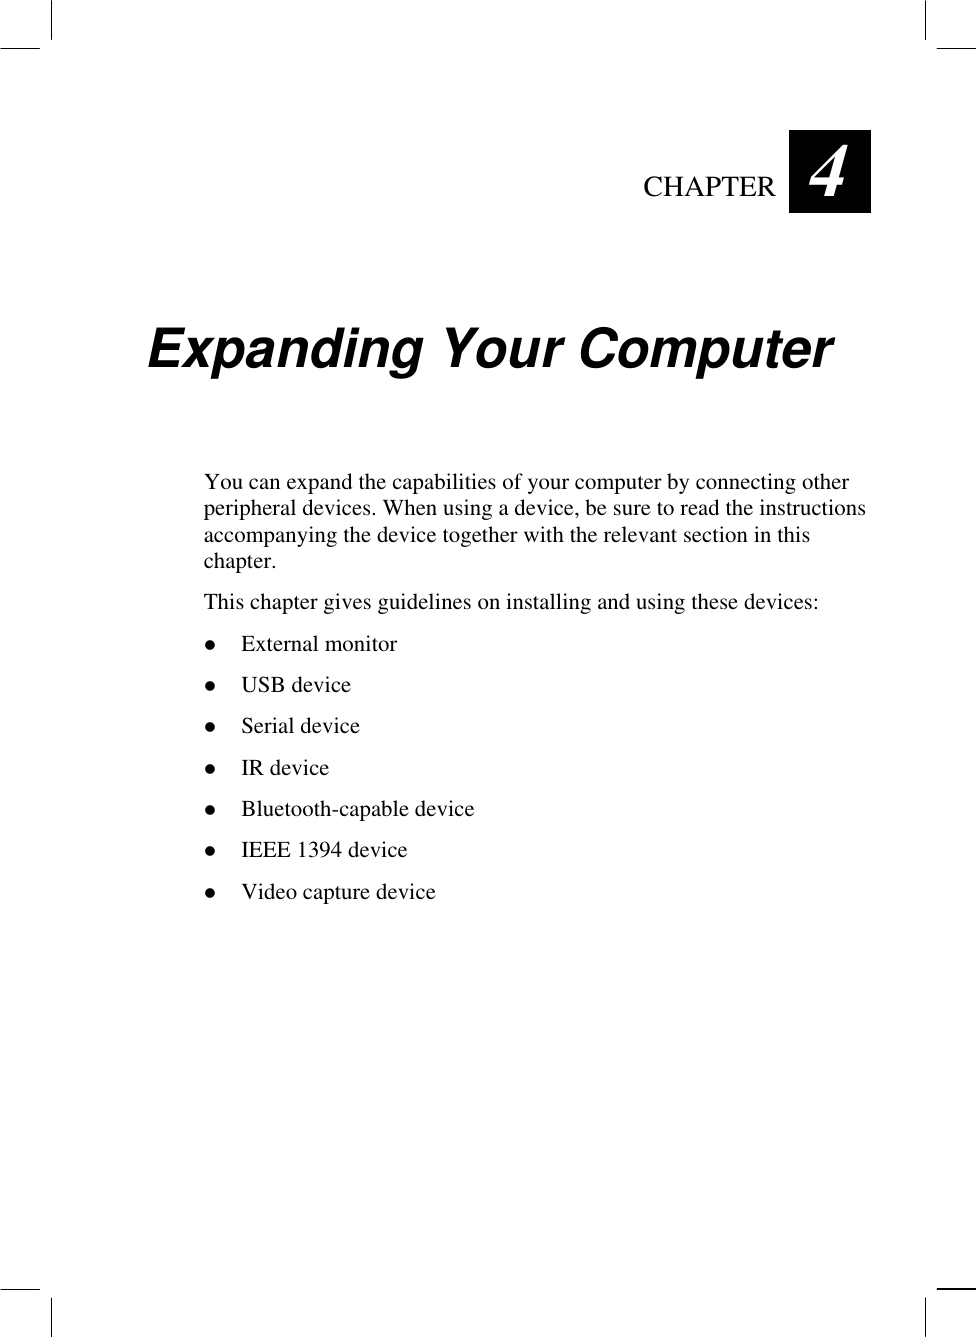   CHAPTER  4 Expanding Your Computer You can expand the capabilities of your computer by connecting other peripheral devices. When using a device, be sure to read the instructions accompanying the device together with the relevant section in this chapter. This chapter gives guidelines on installing and using these devices:   External monitor   USB device   Serial device   IR device   Bluetooth-capable device   IEEE 1394 device   Video capture device  